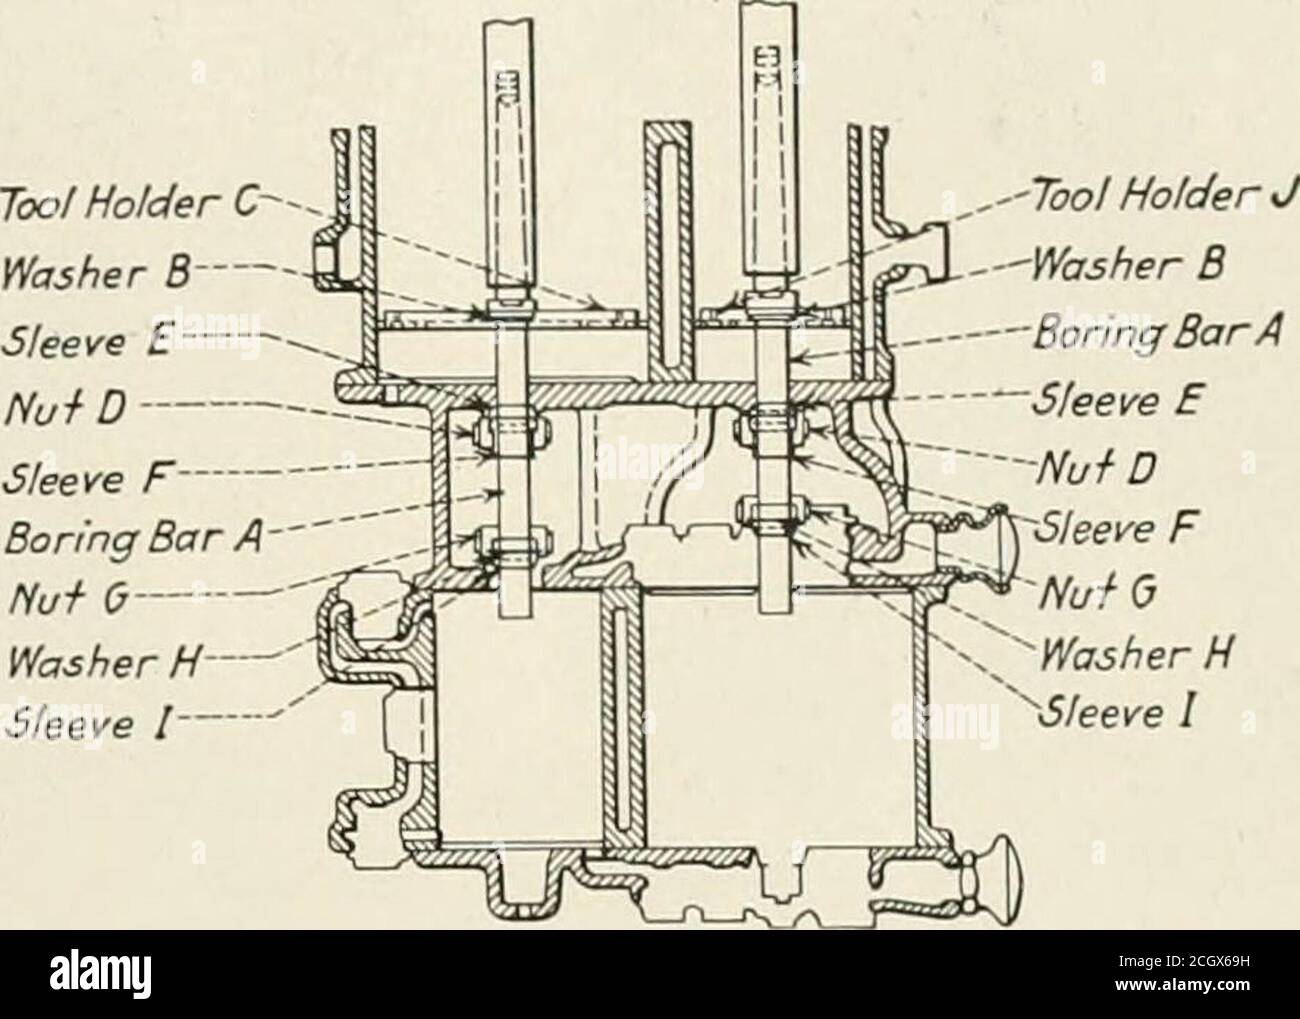 . Railway mechanical engineer . means of the portable boring bar shown in the illustrations.The boring bar is self-centering and rec[uires practically nosetting up. The radial drill as illustrated in Fig. 1 isprobably the best type of machine for the operation. A cross-section through the air compressor and boring baris given in Fig 2 which also indicates the boring bar ar-rangement when assembled. It will be noted that a tapershank on the boring bar proper is arranged to fit in the drill. Fig. 1—Radial Drill Equipped With Cylinder Boring Bar reboring. Breaking the center casting joints and re Stock Photo